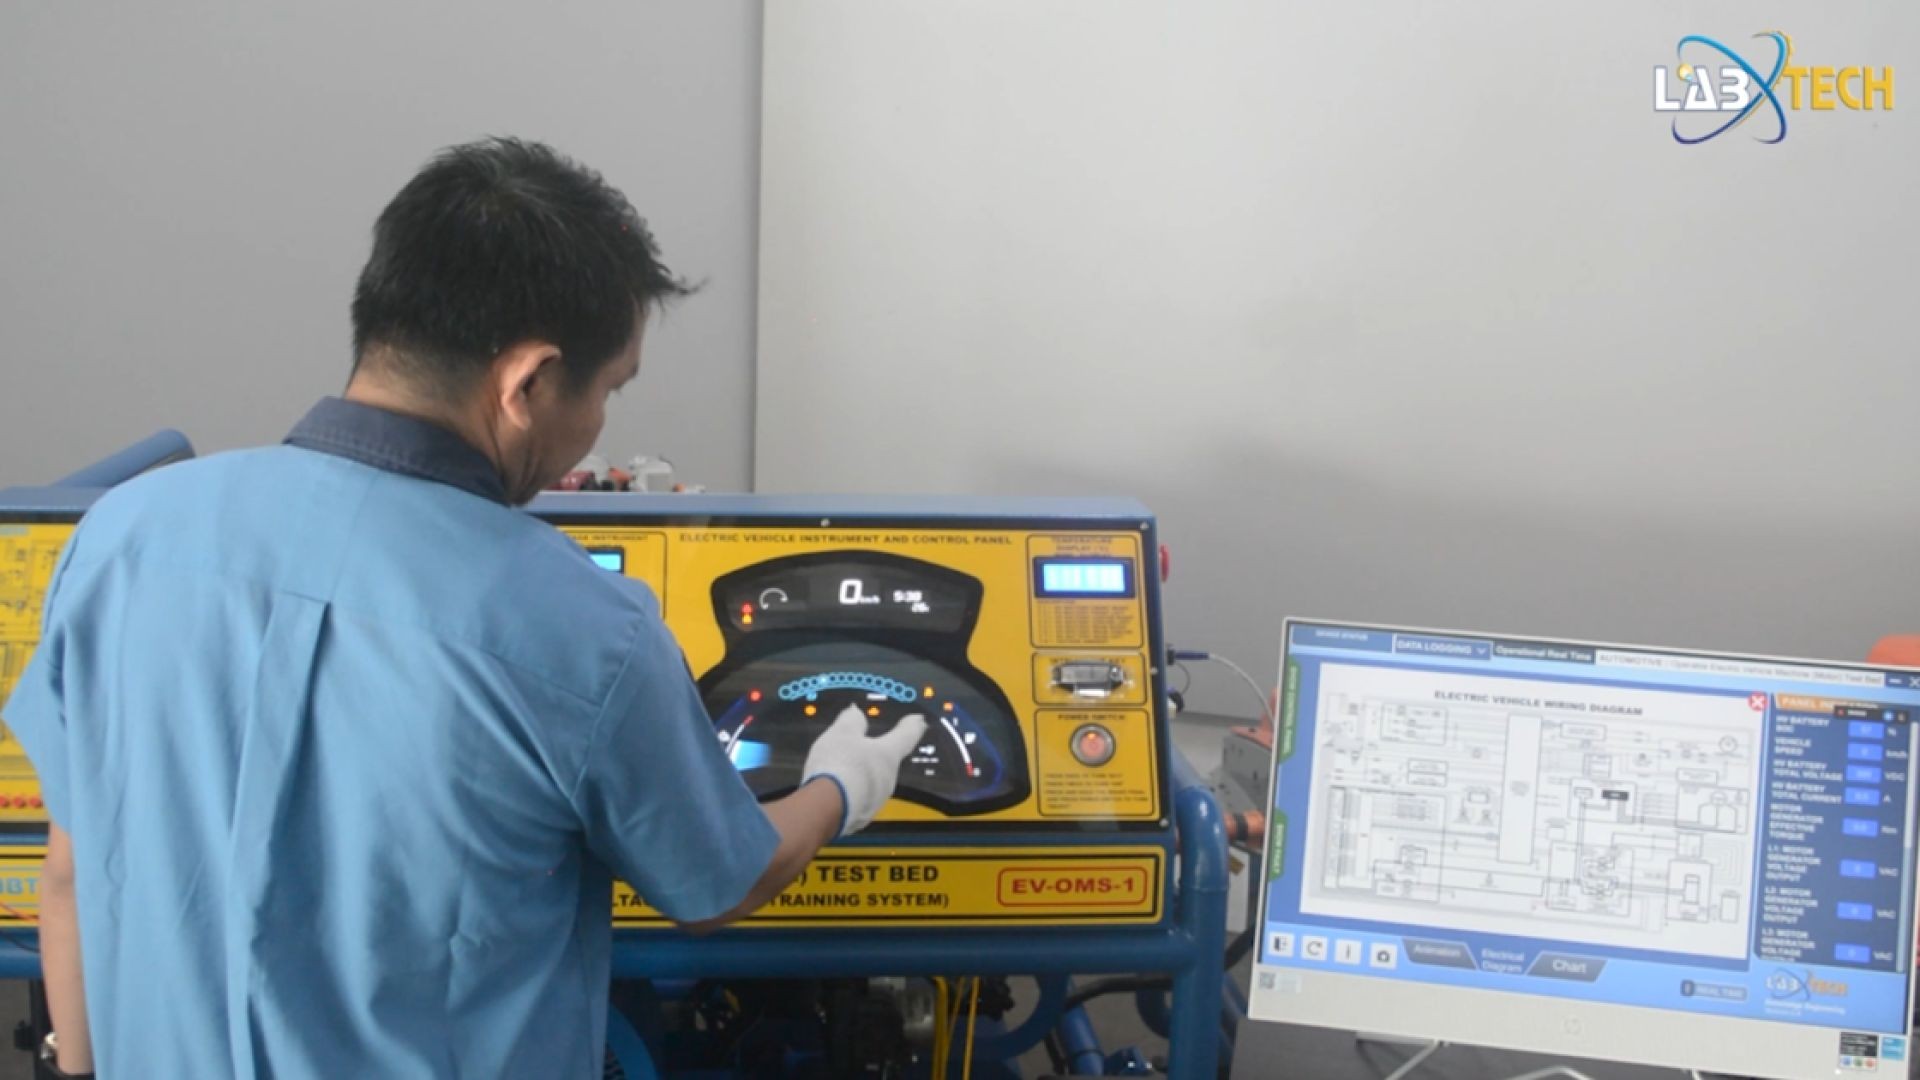 Operable Electric Vehicle Machine (Motor) Test Bed (⁣⁣EV-OMS-1)